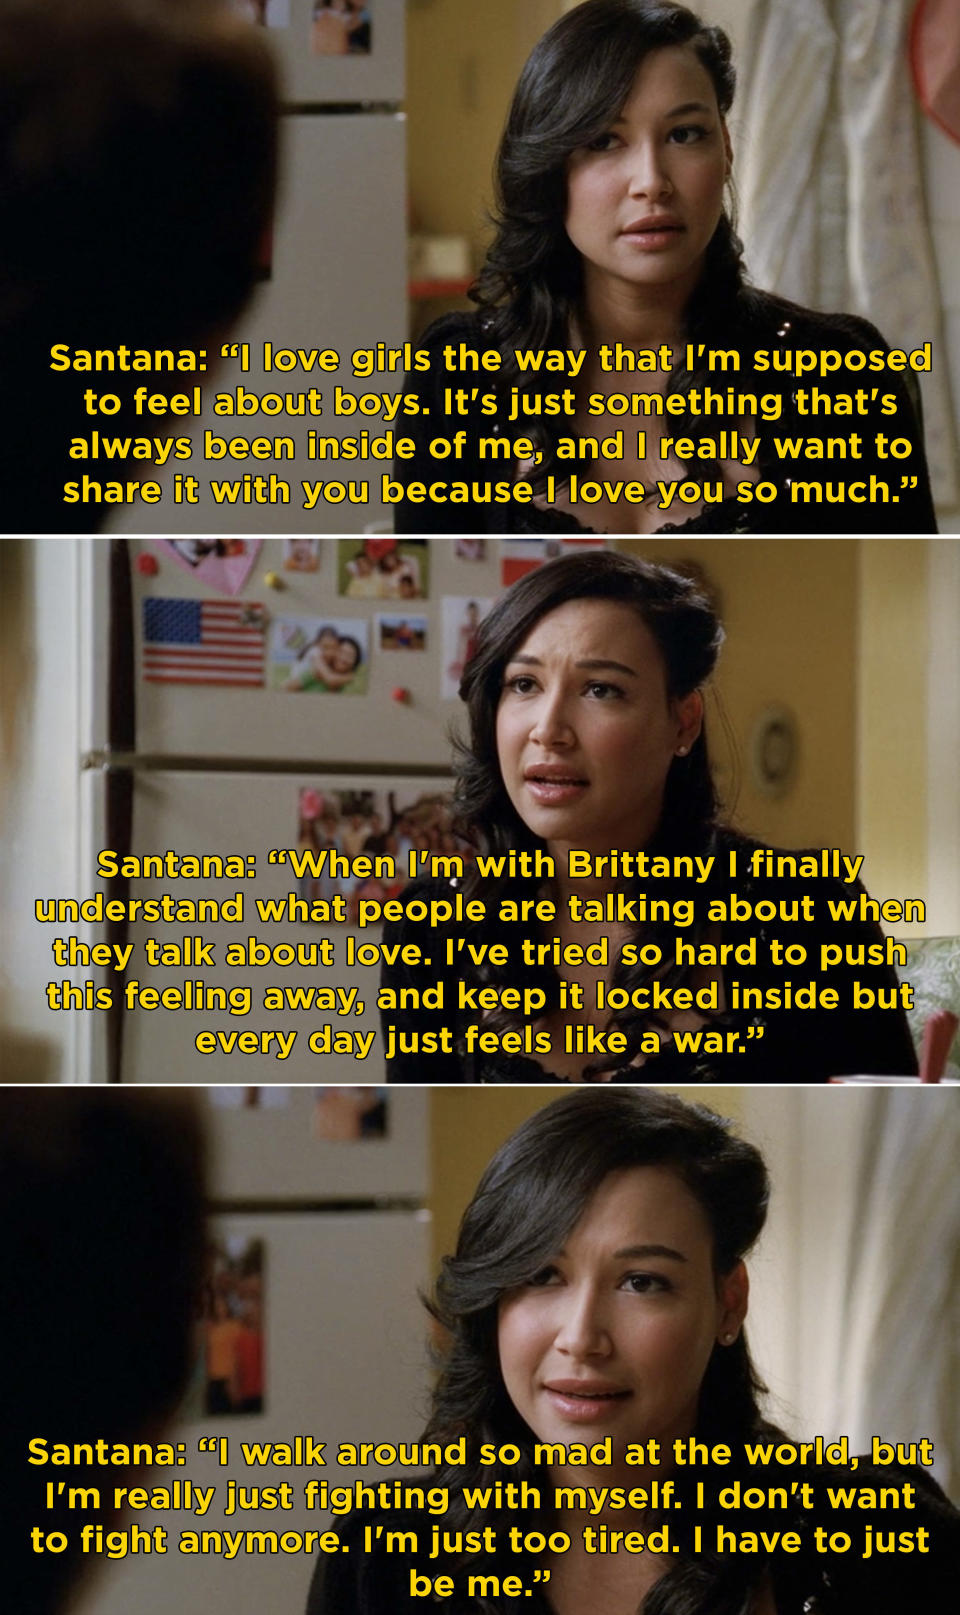 Santana coming out to her abuela, saying: "I love girls the way I'm supposed to feel about boys. It's just something that's always been inside of me"